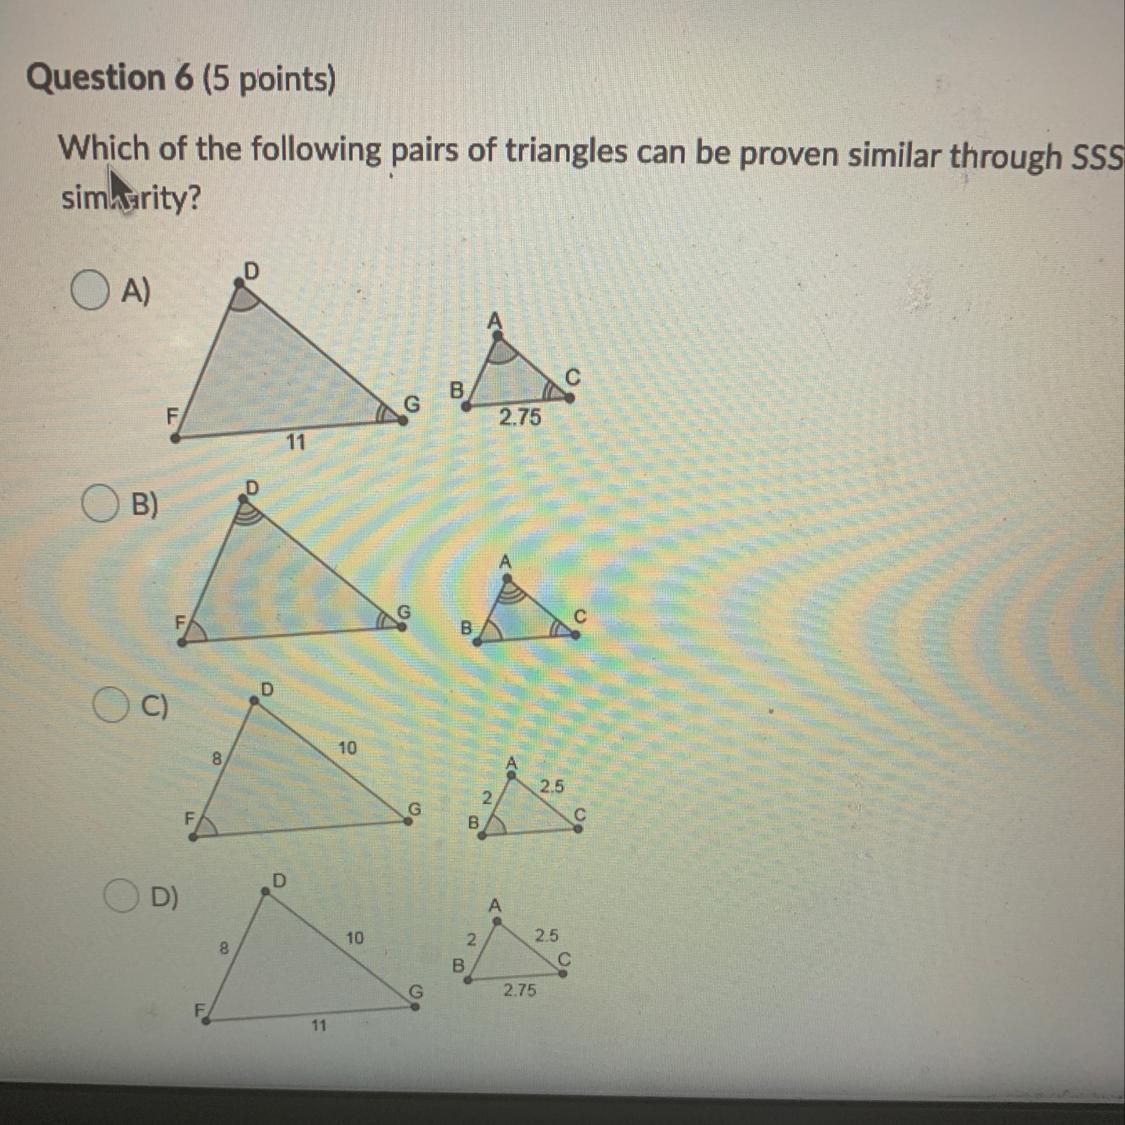 Which Of The Following Pairs Of Triangles Can Be Proven Similar Through SSS Similarity?